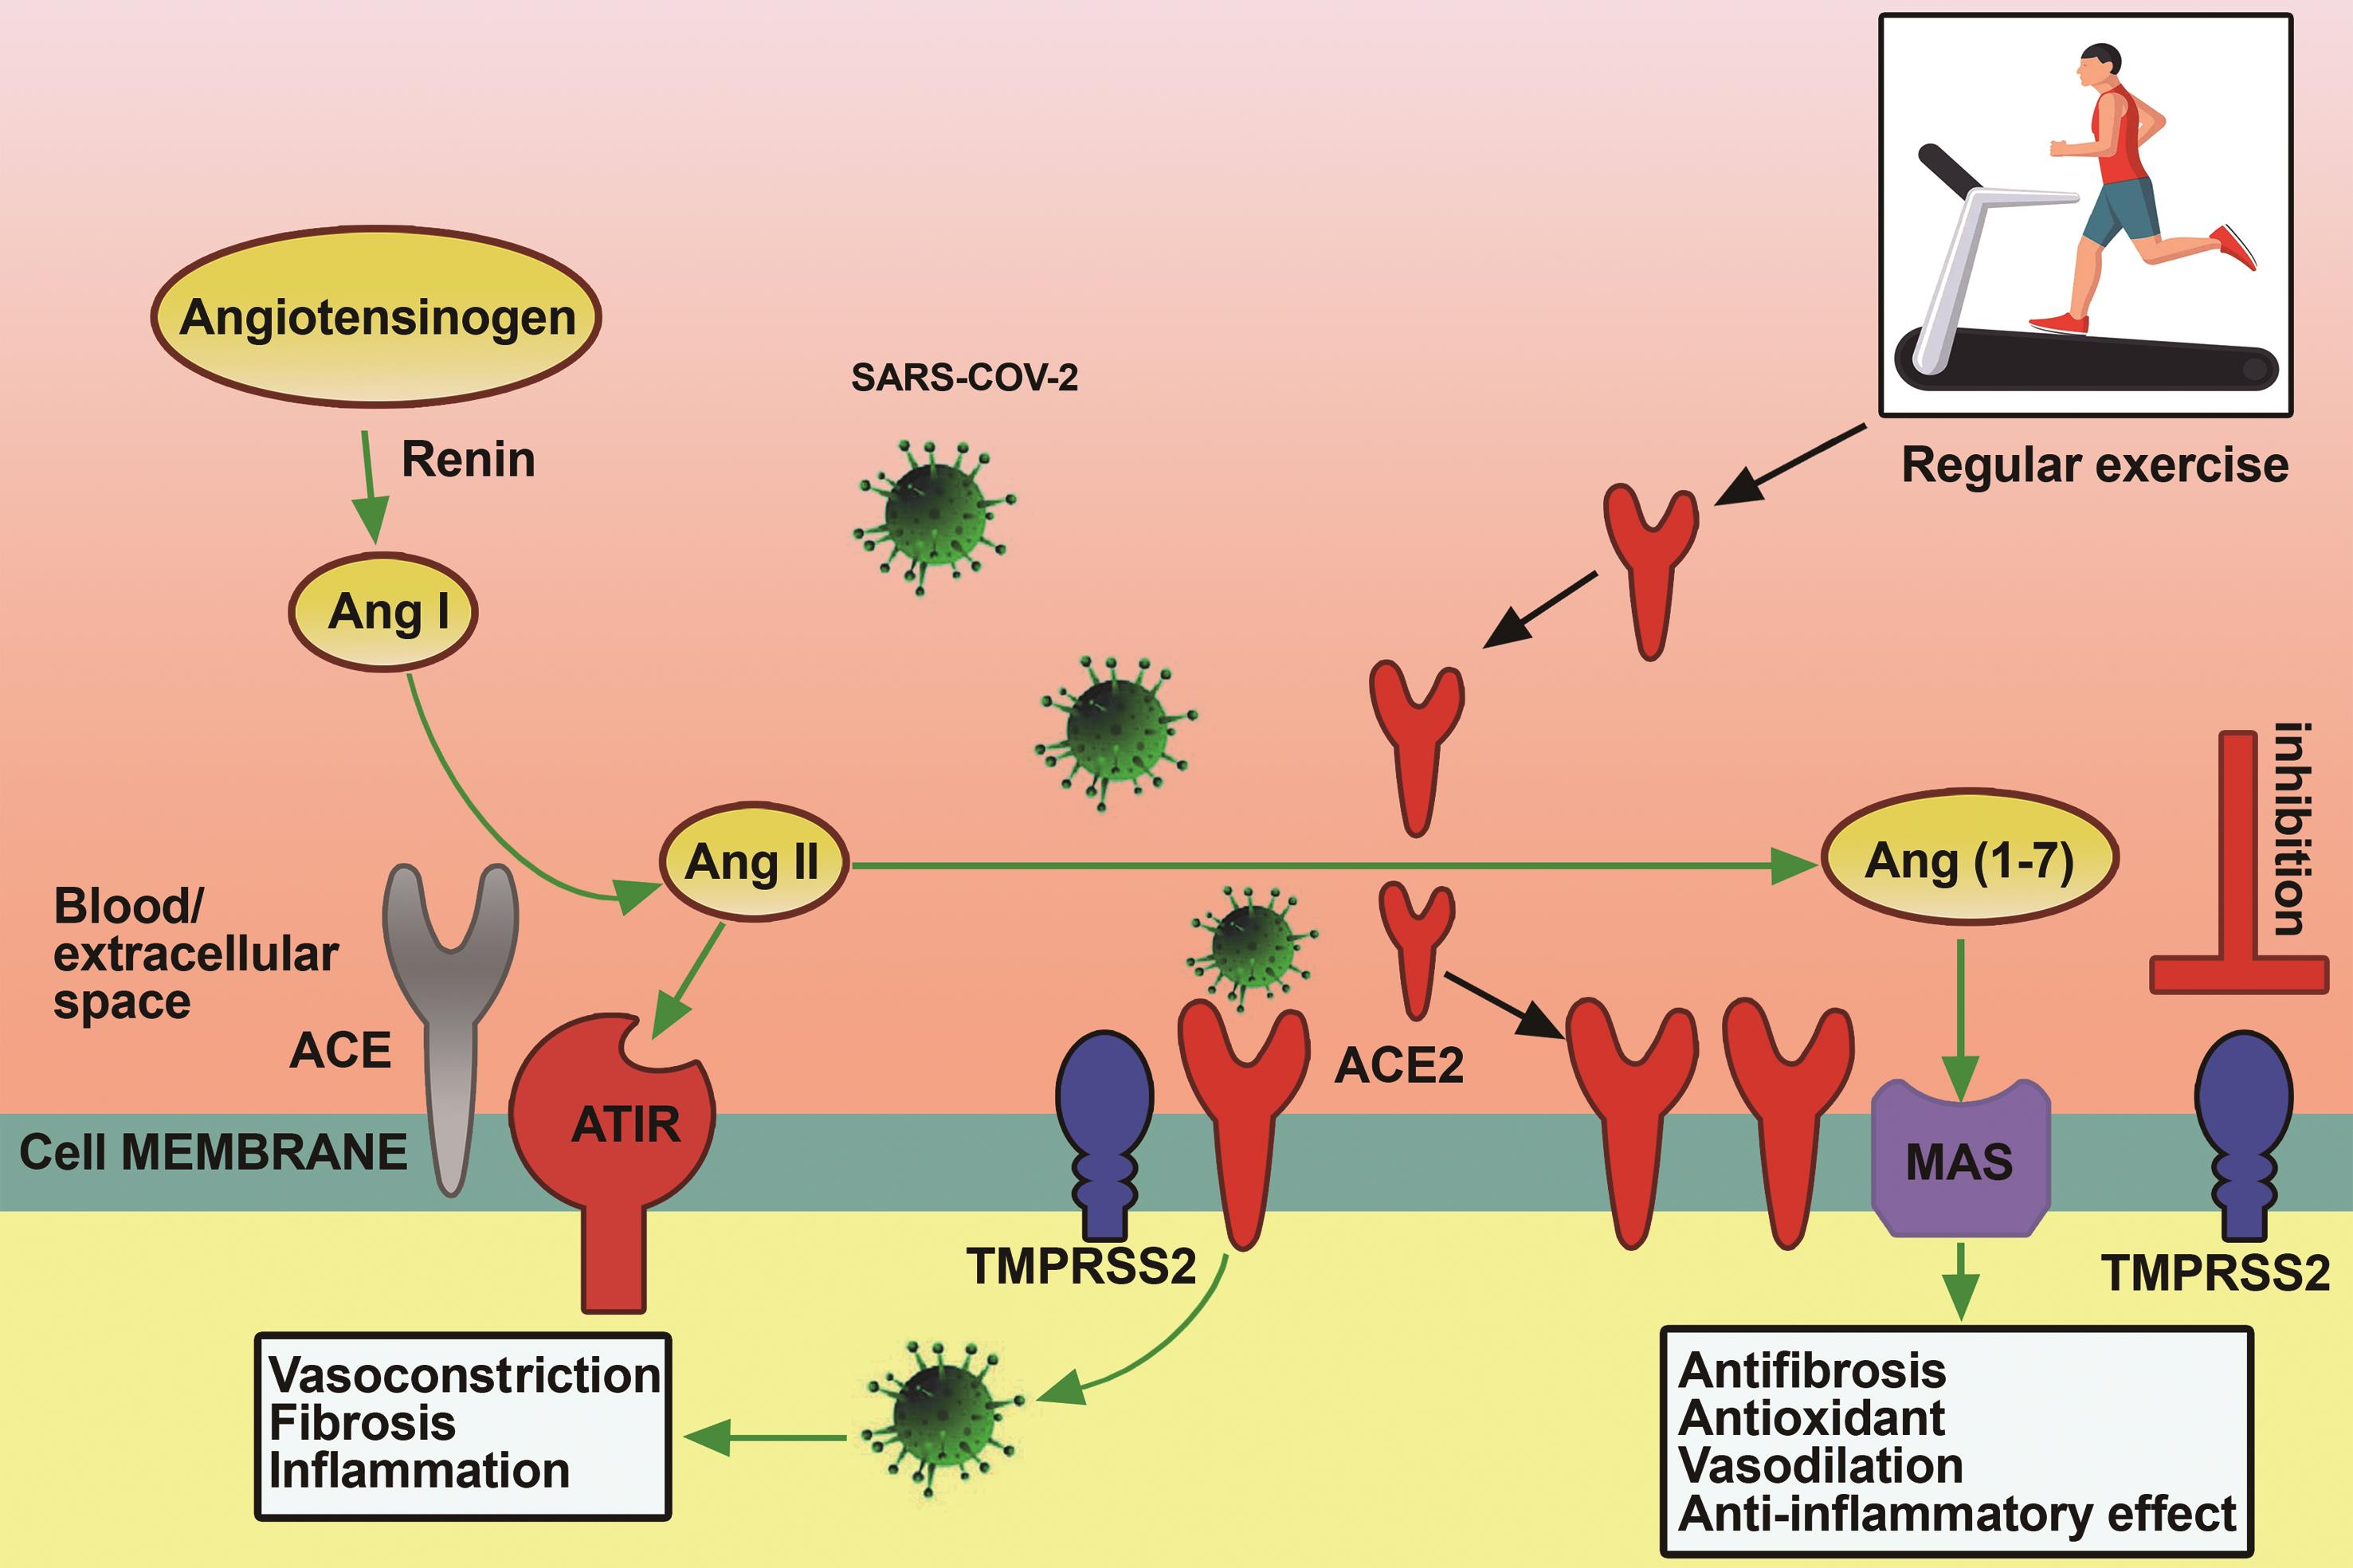 Presence of COVID-19 at the cell surface and binding to ACE2 and activation by TMPRSS2. Then, receptor dysfunction, vasoconstriction, inflammation, and fibrosis are observed.